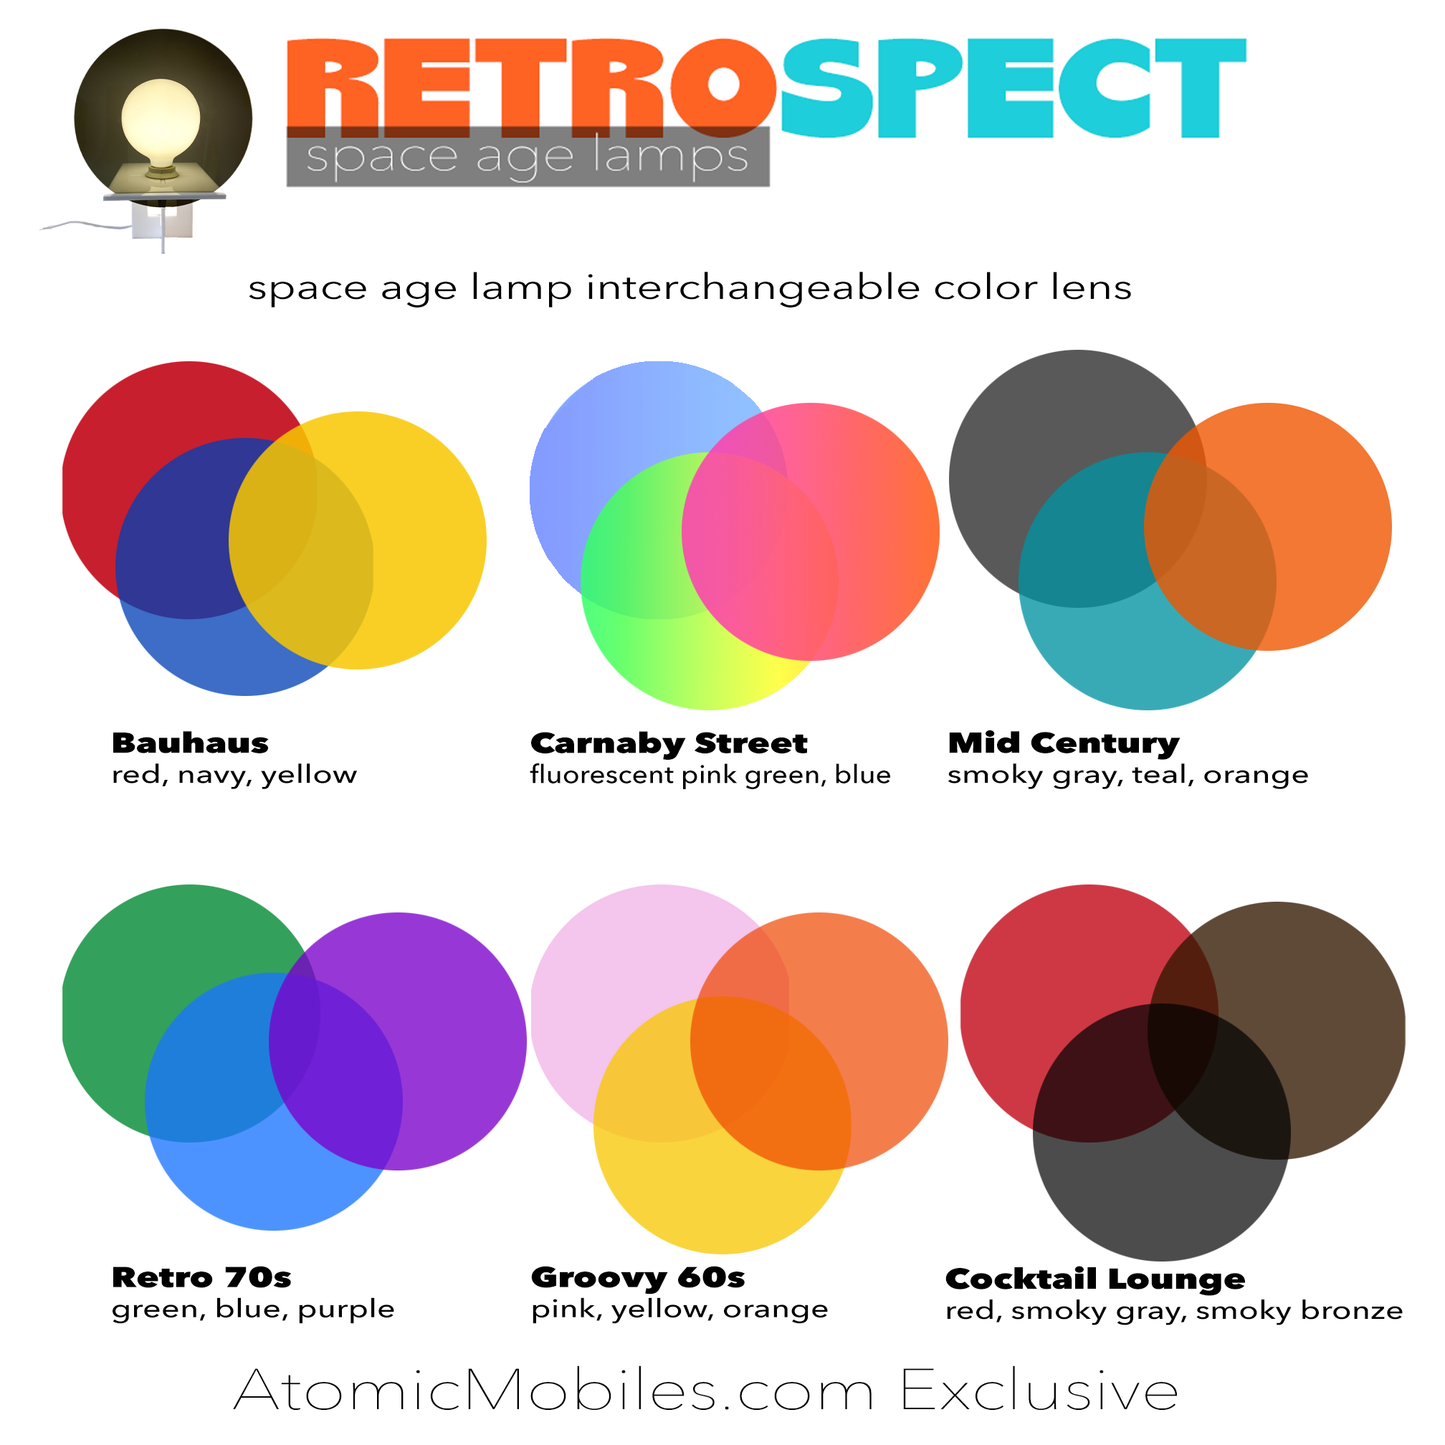 Transparent Acrylic Plexiglass Color "LENS" Discs Sets in Fluorescent NEON colors of Pink/Orange, Green/Yellow, and Blue for RETROSPECT Space Age Lamp by AtomicMobiles.com